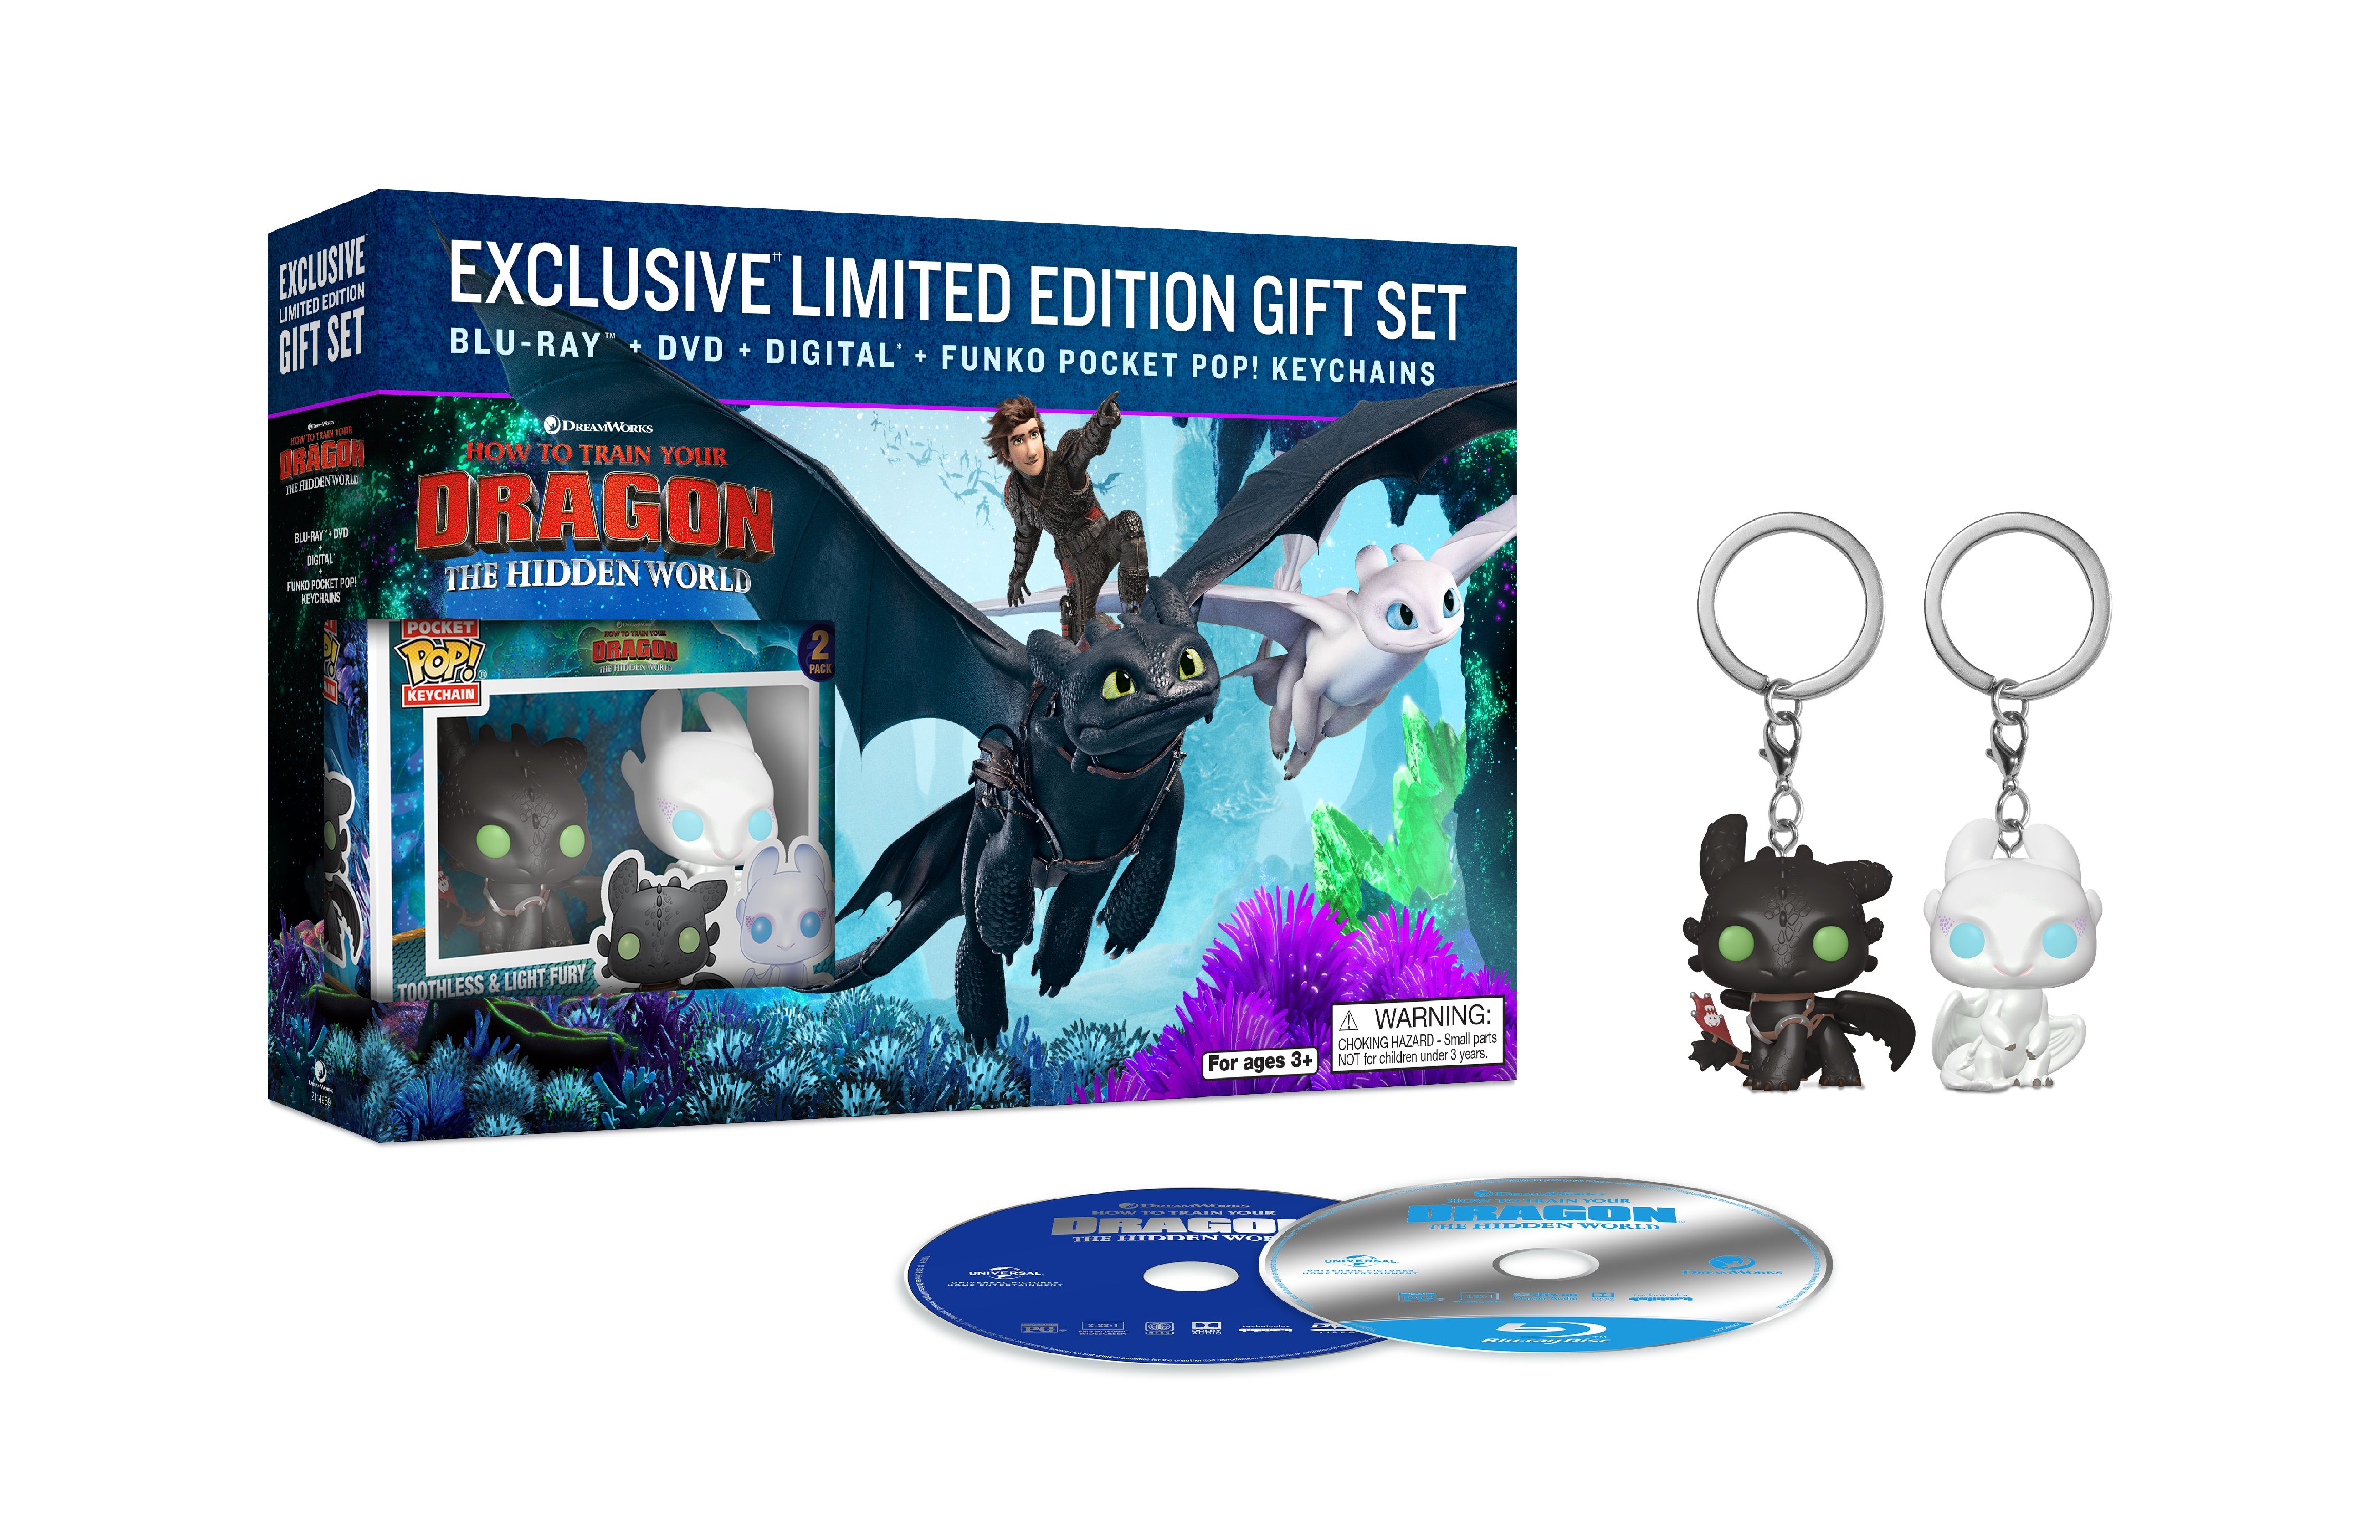 How To Train Your Dragon 3 (Blu-ray) (Walmart Exclusive) - image 2 of 3